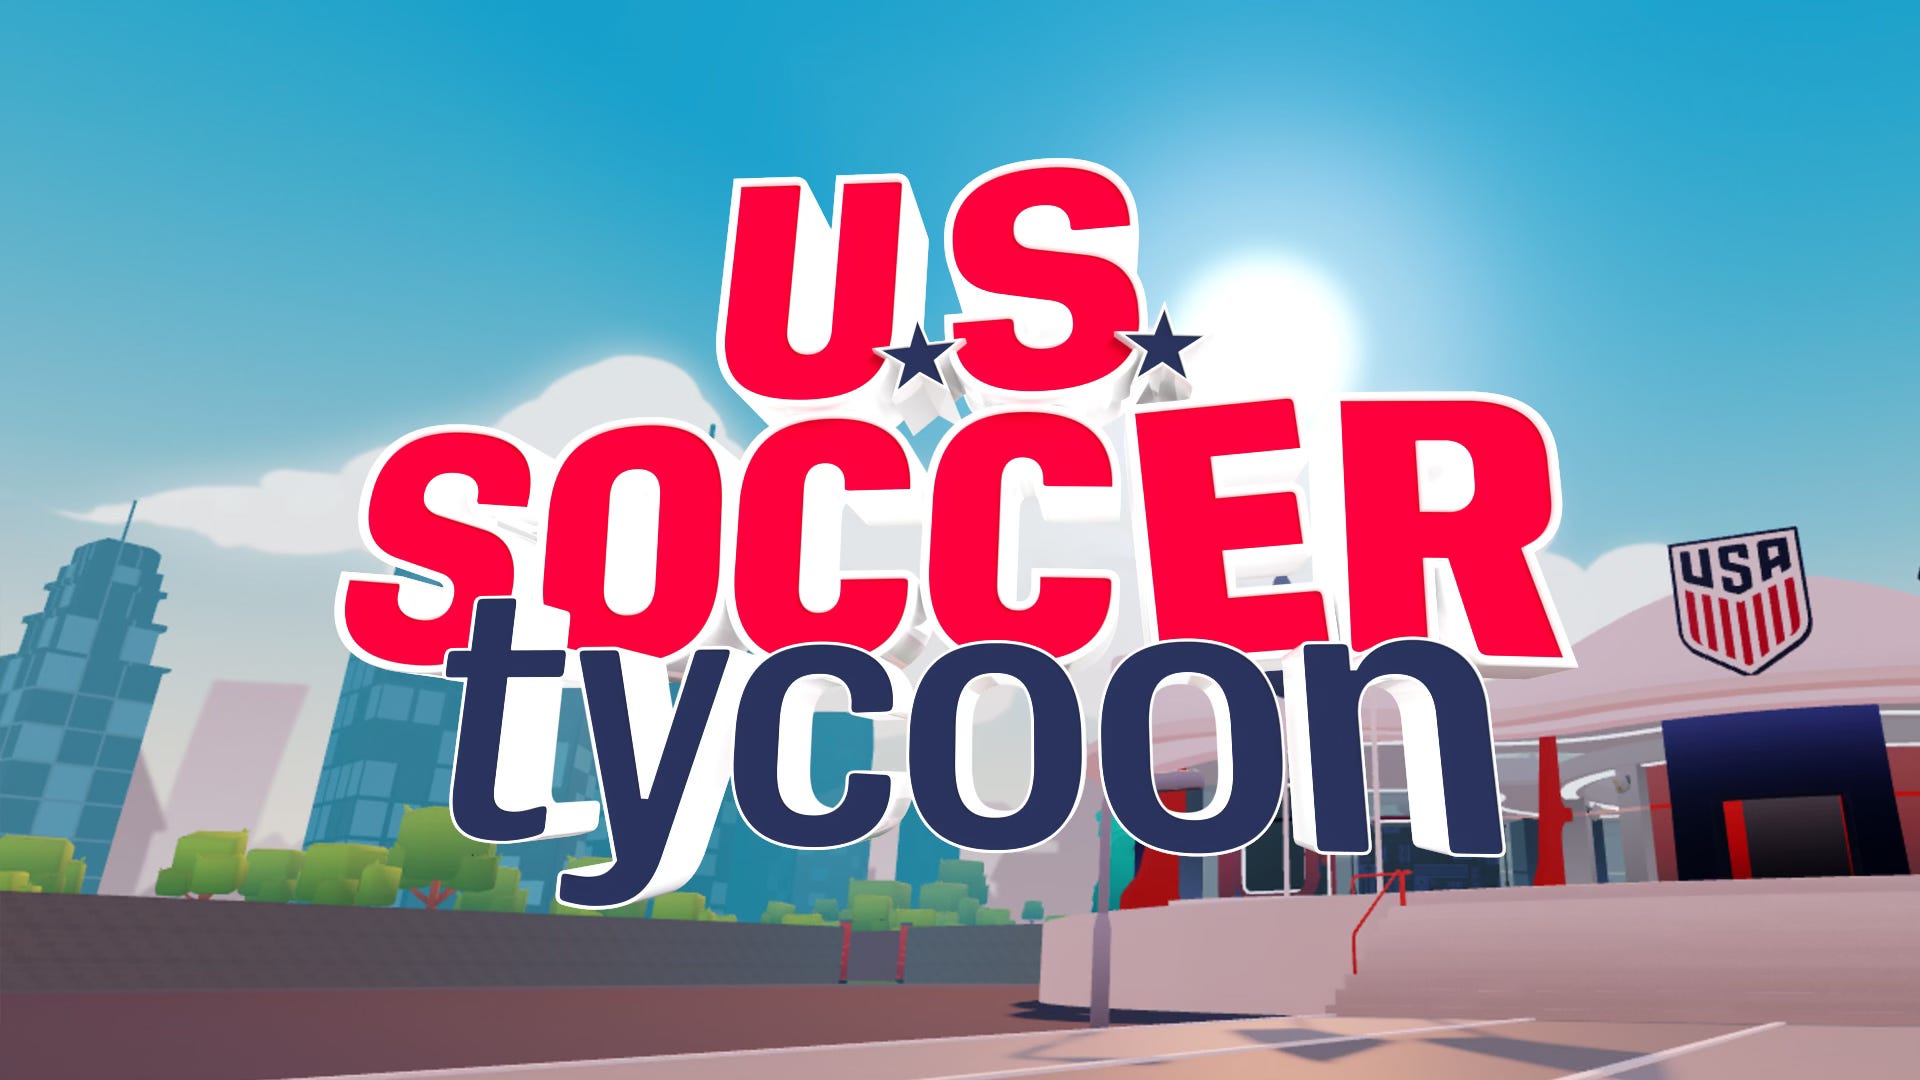 U.S. Soccer Tycoon Comes to FIFA World 2.0 on Roblox